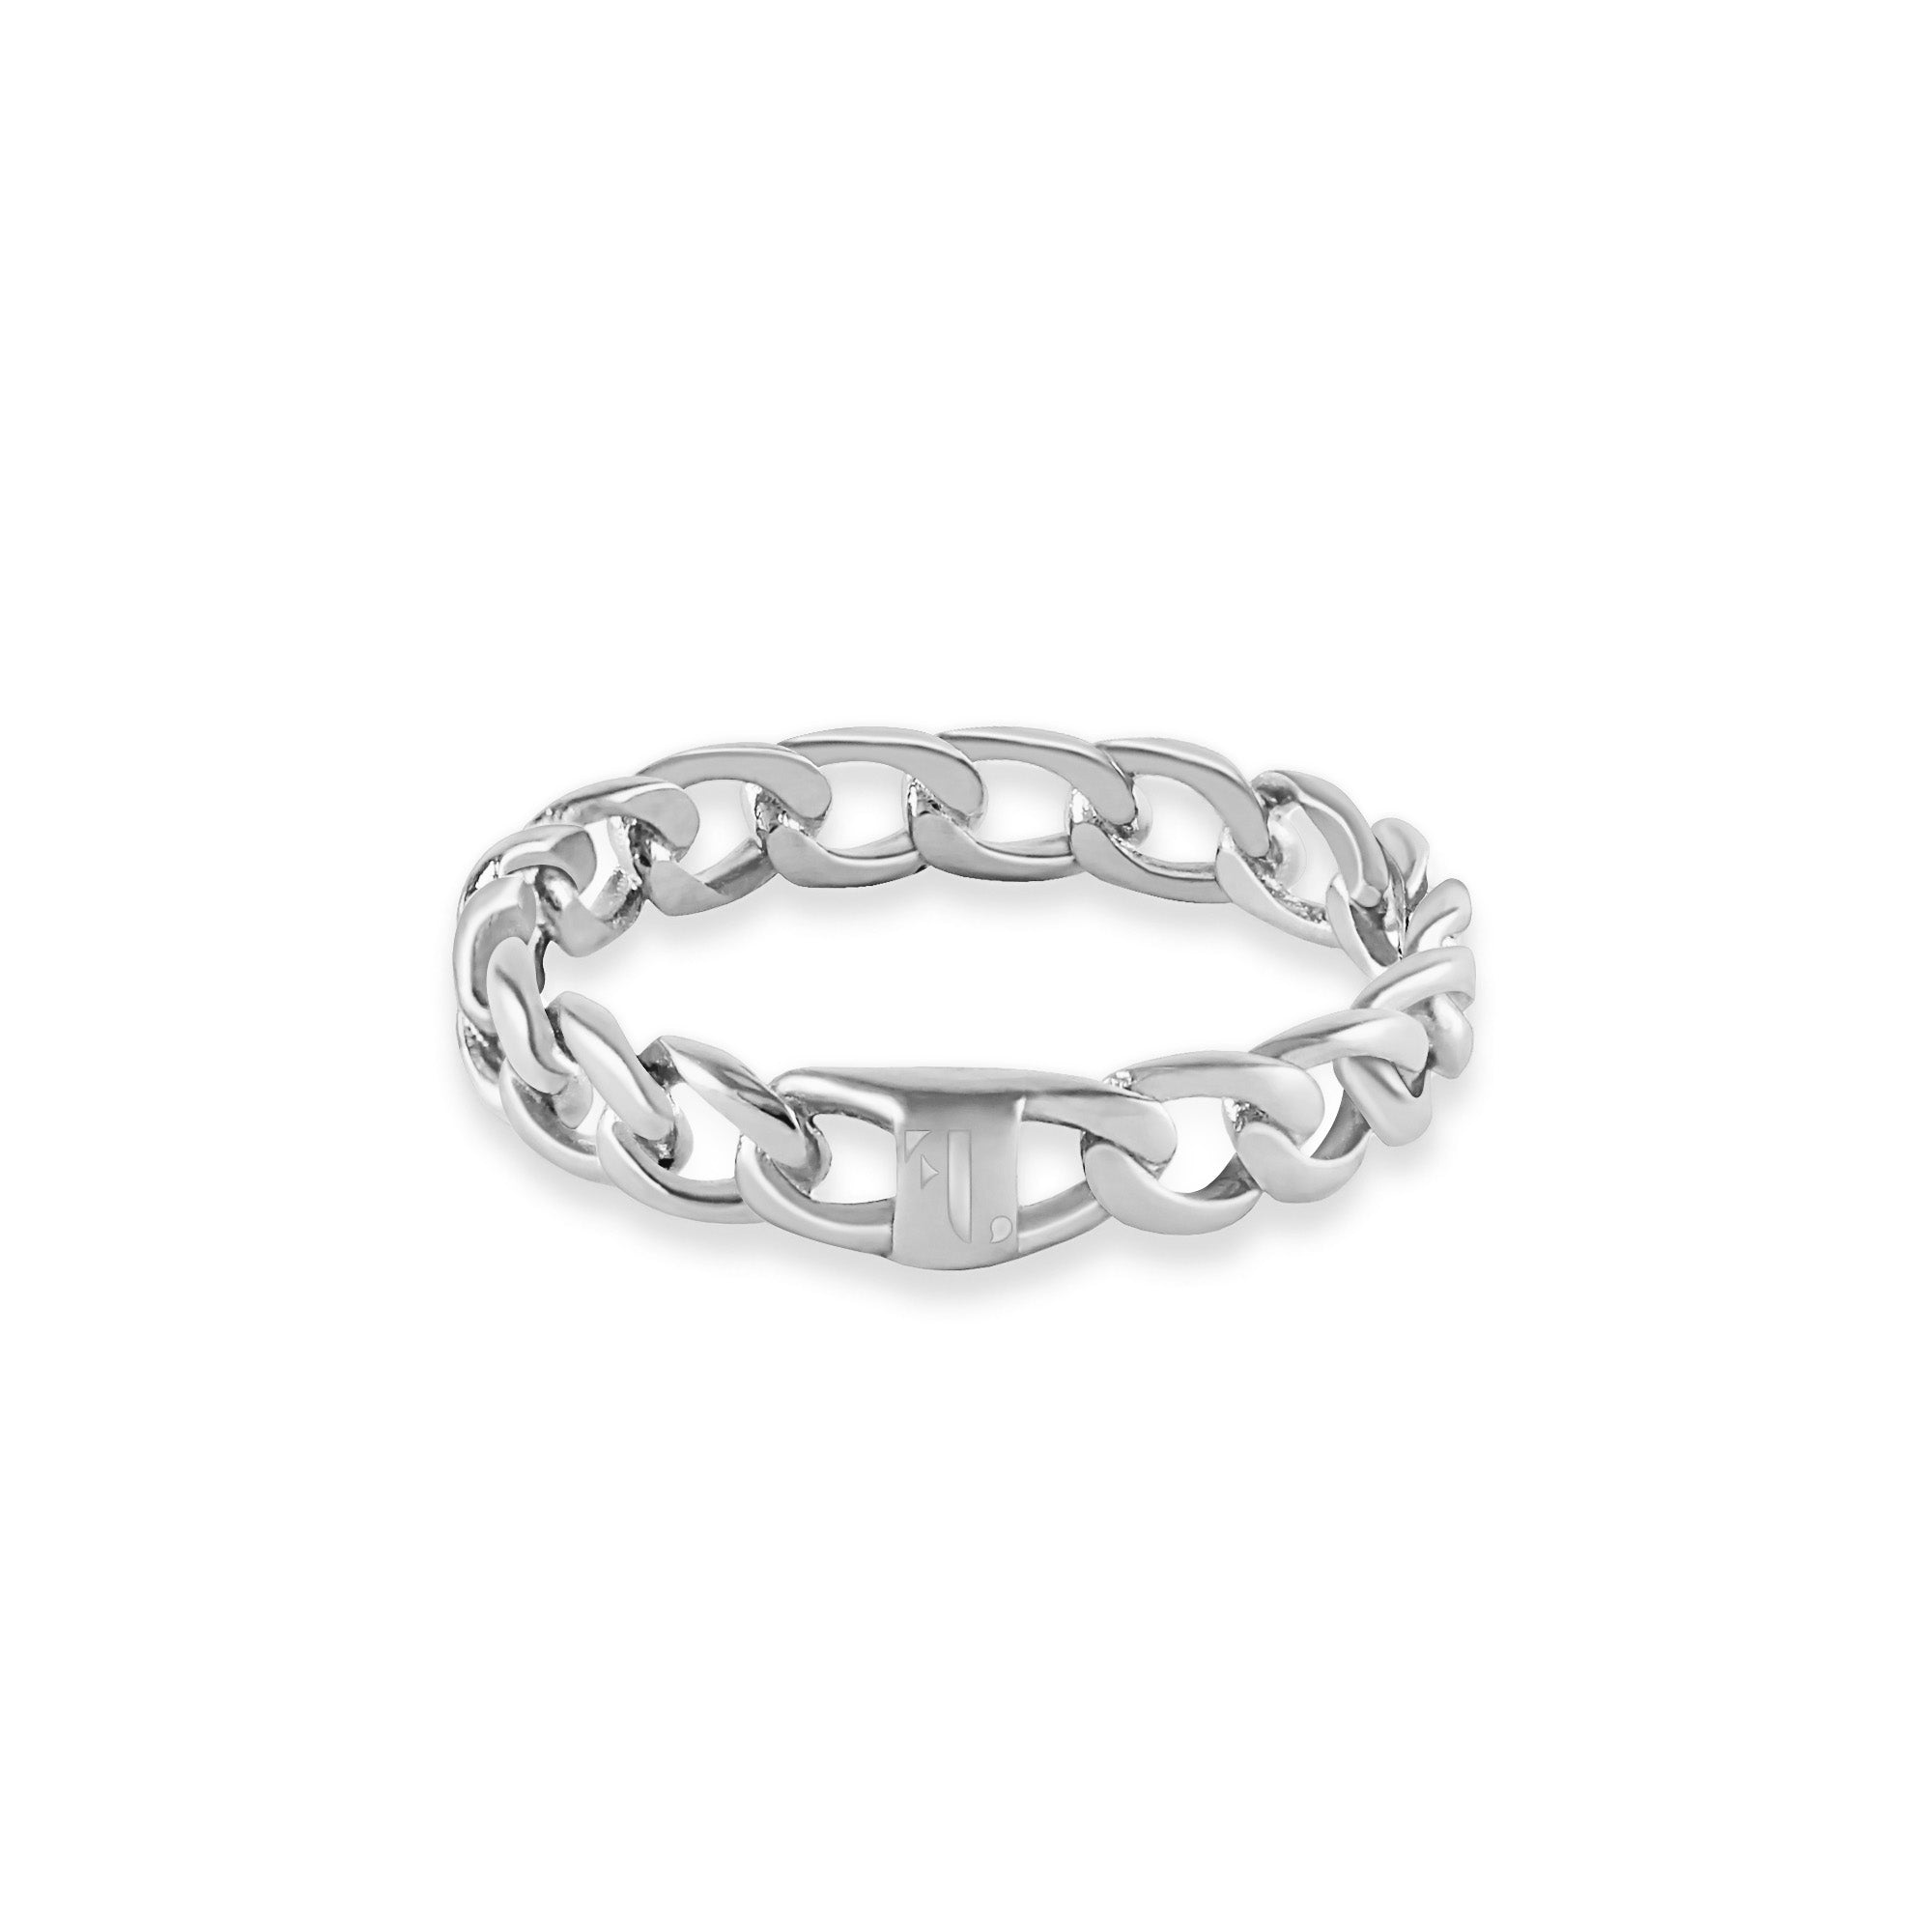 Baby Dusia women's ring by Five Jwlry in silver color, featuring a thin 4mm Cuban chain design with an engraved signature logo. Made from water-resistant 316L stainless steel. Hypoallergenic with a 2-year warranty.